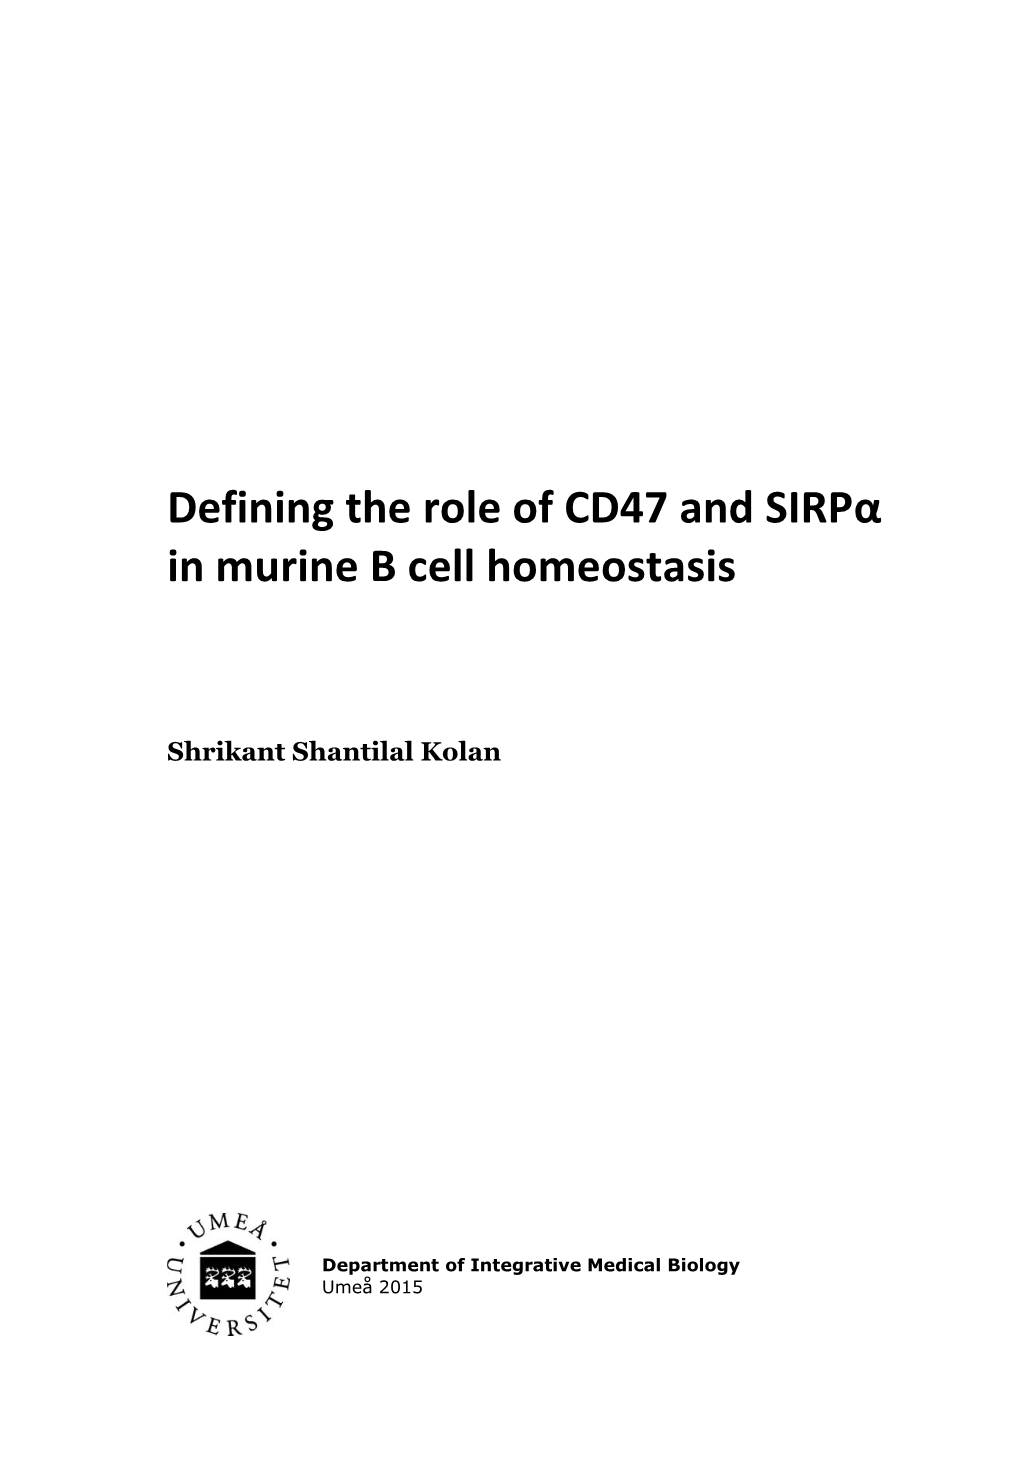 Defining the Role of CD47 and Sirpα in Murine B Cell Homeostasis